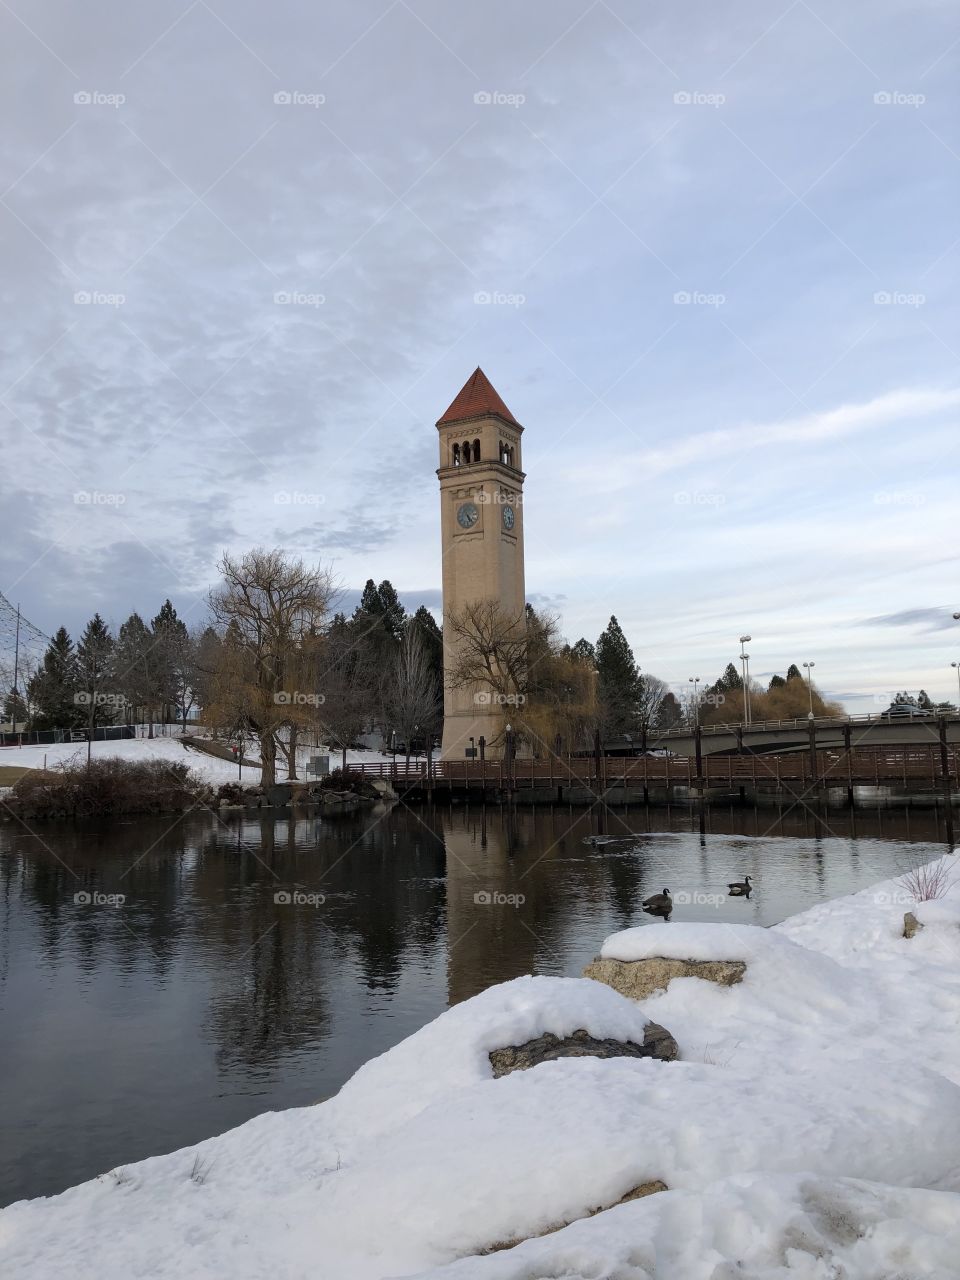 Clock tower in the Winter